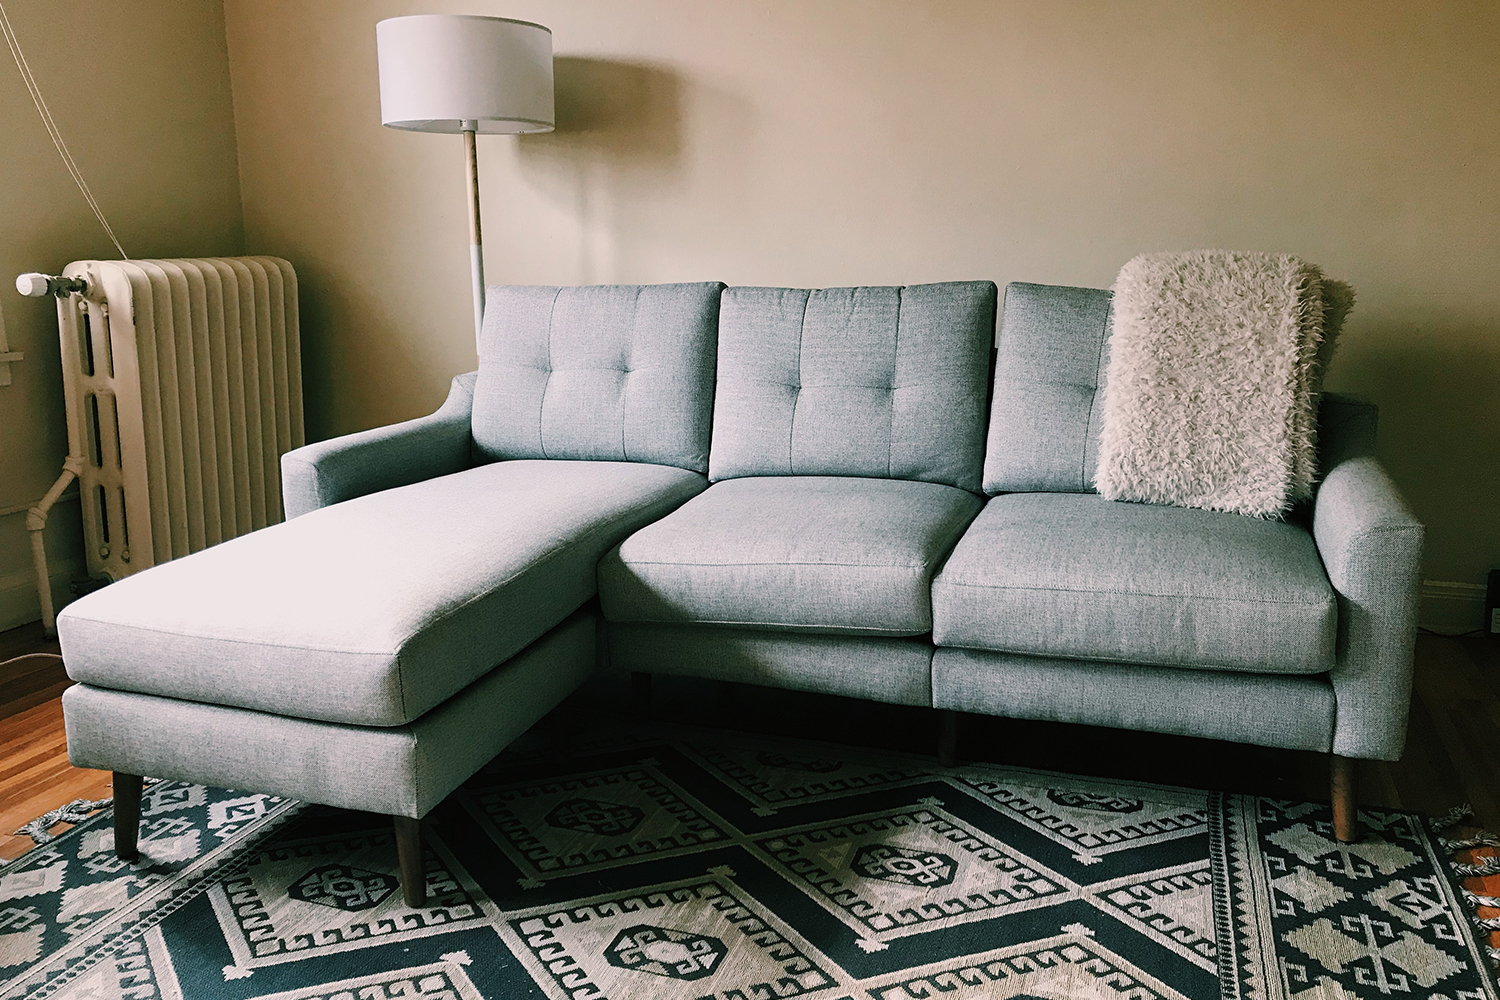 A Burrow Nomad Sofa Sectional in grey sitting on a rug with a blanket draped over the back